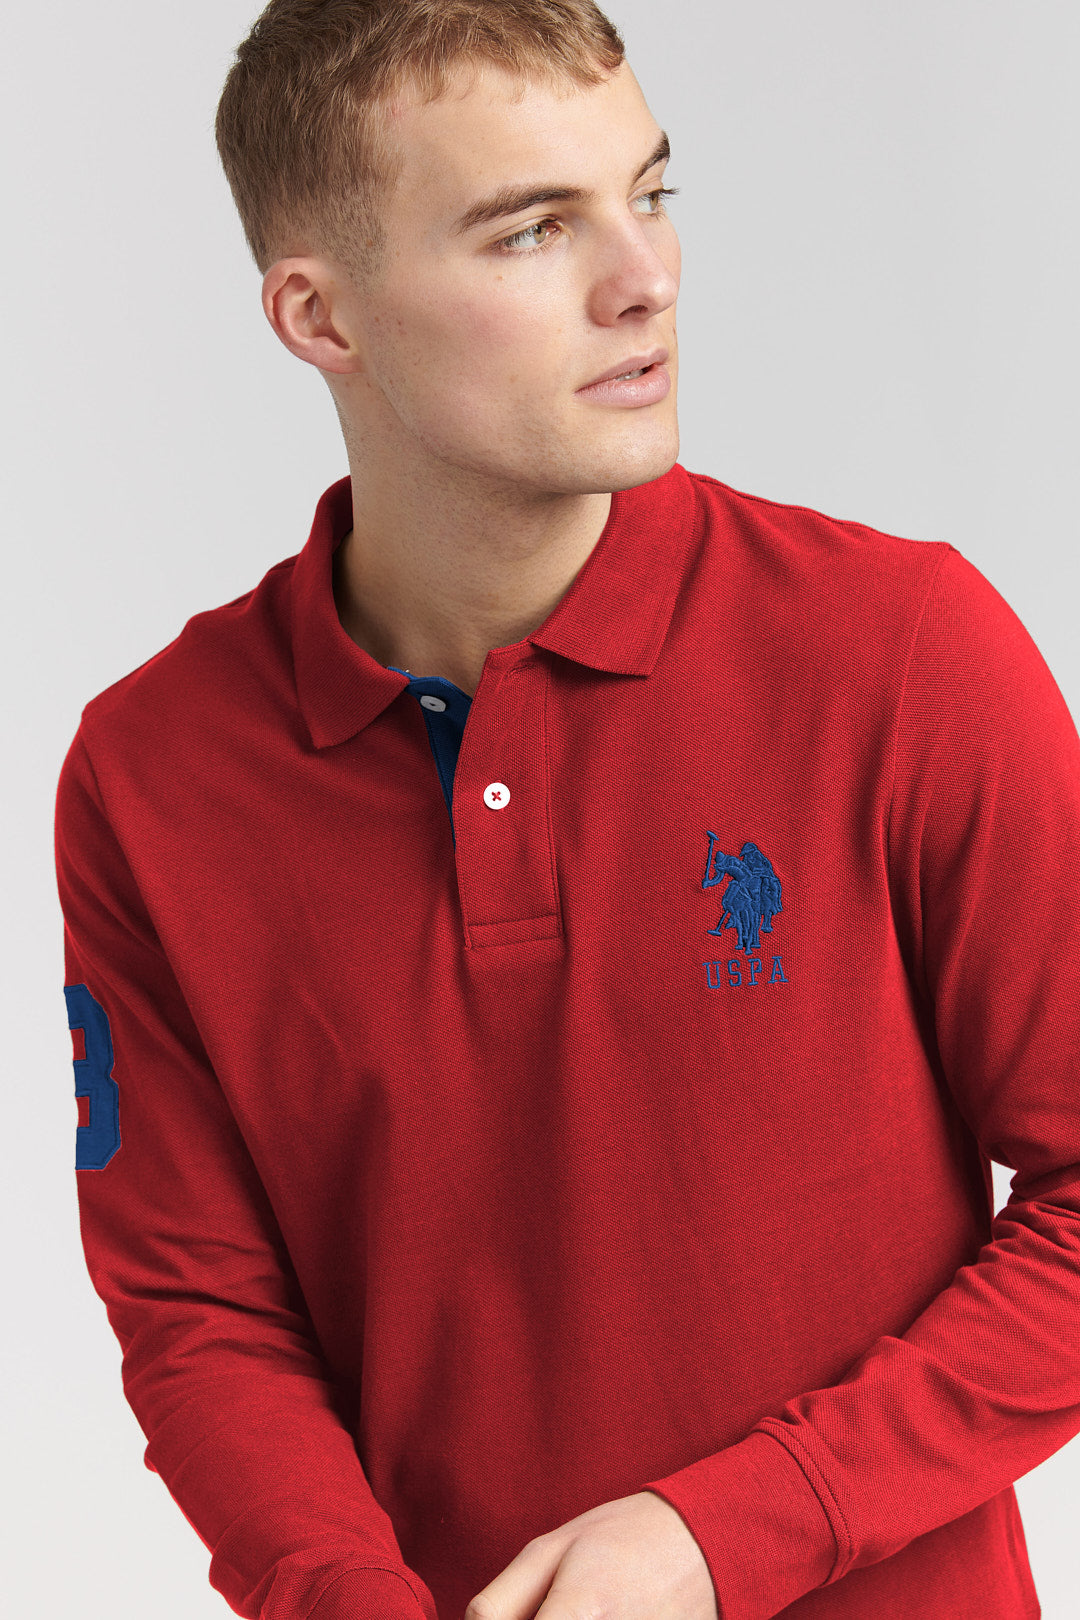 Mens Player 3 Long Sleeve Polo Shirt in Biking Red